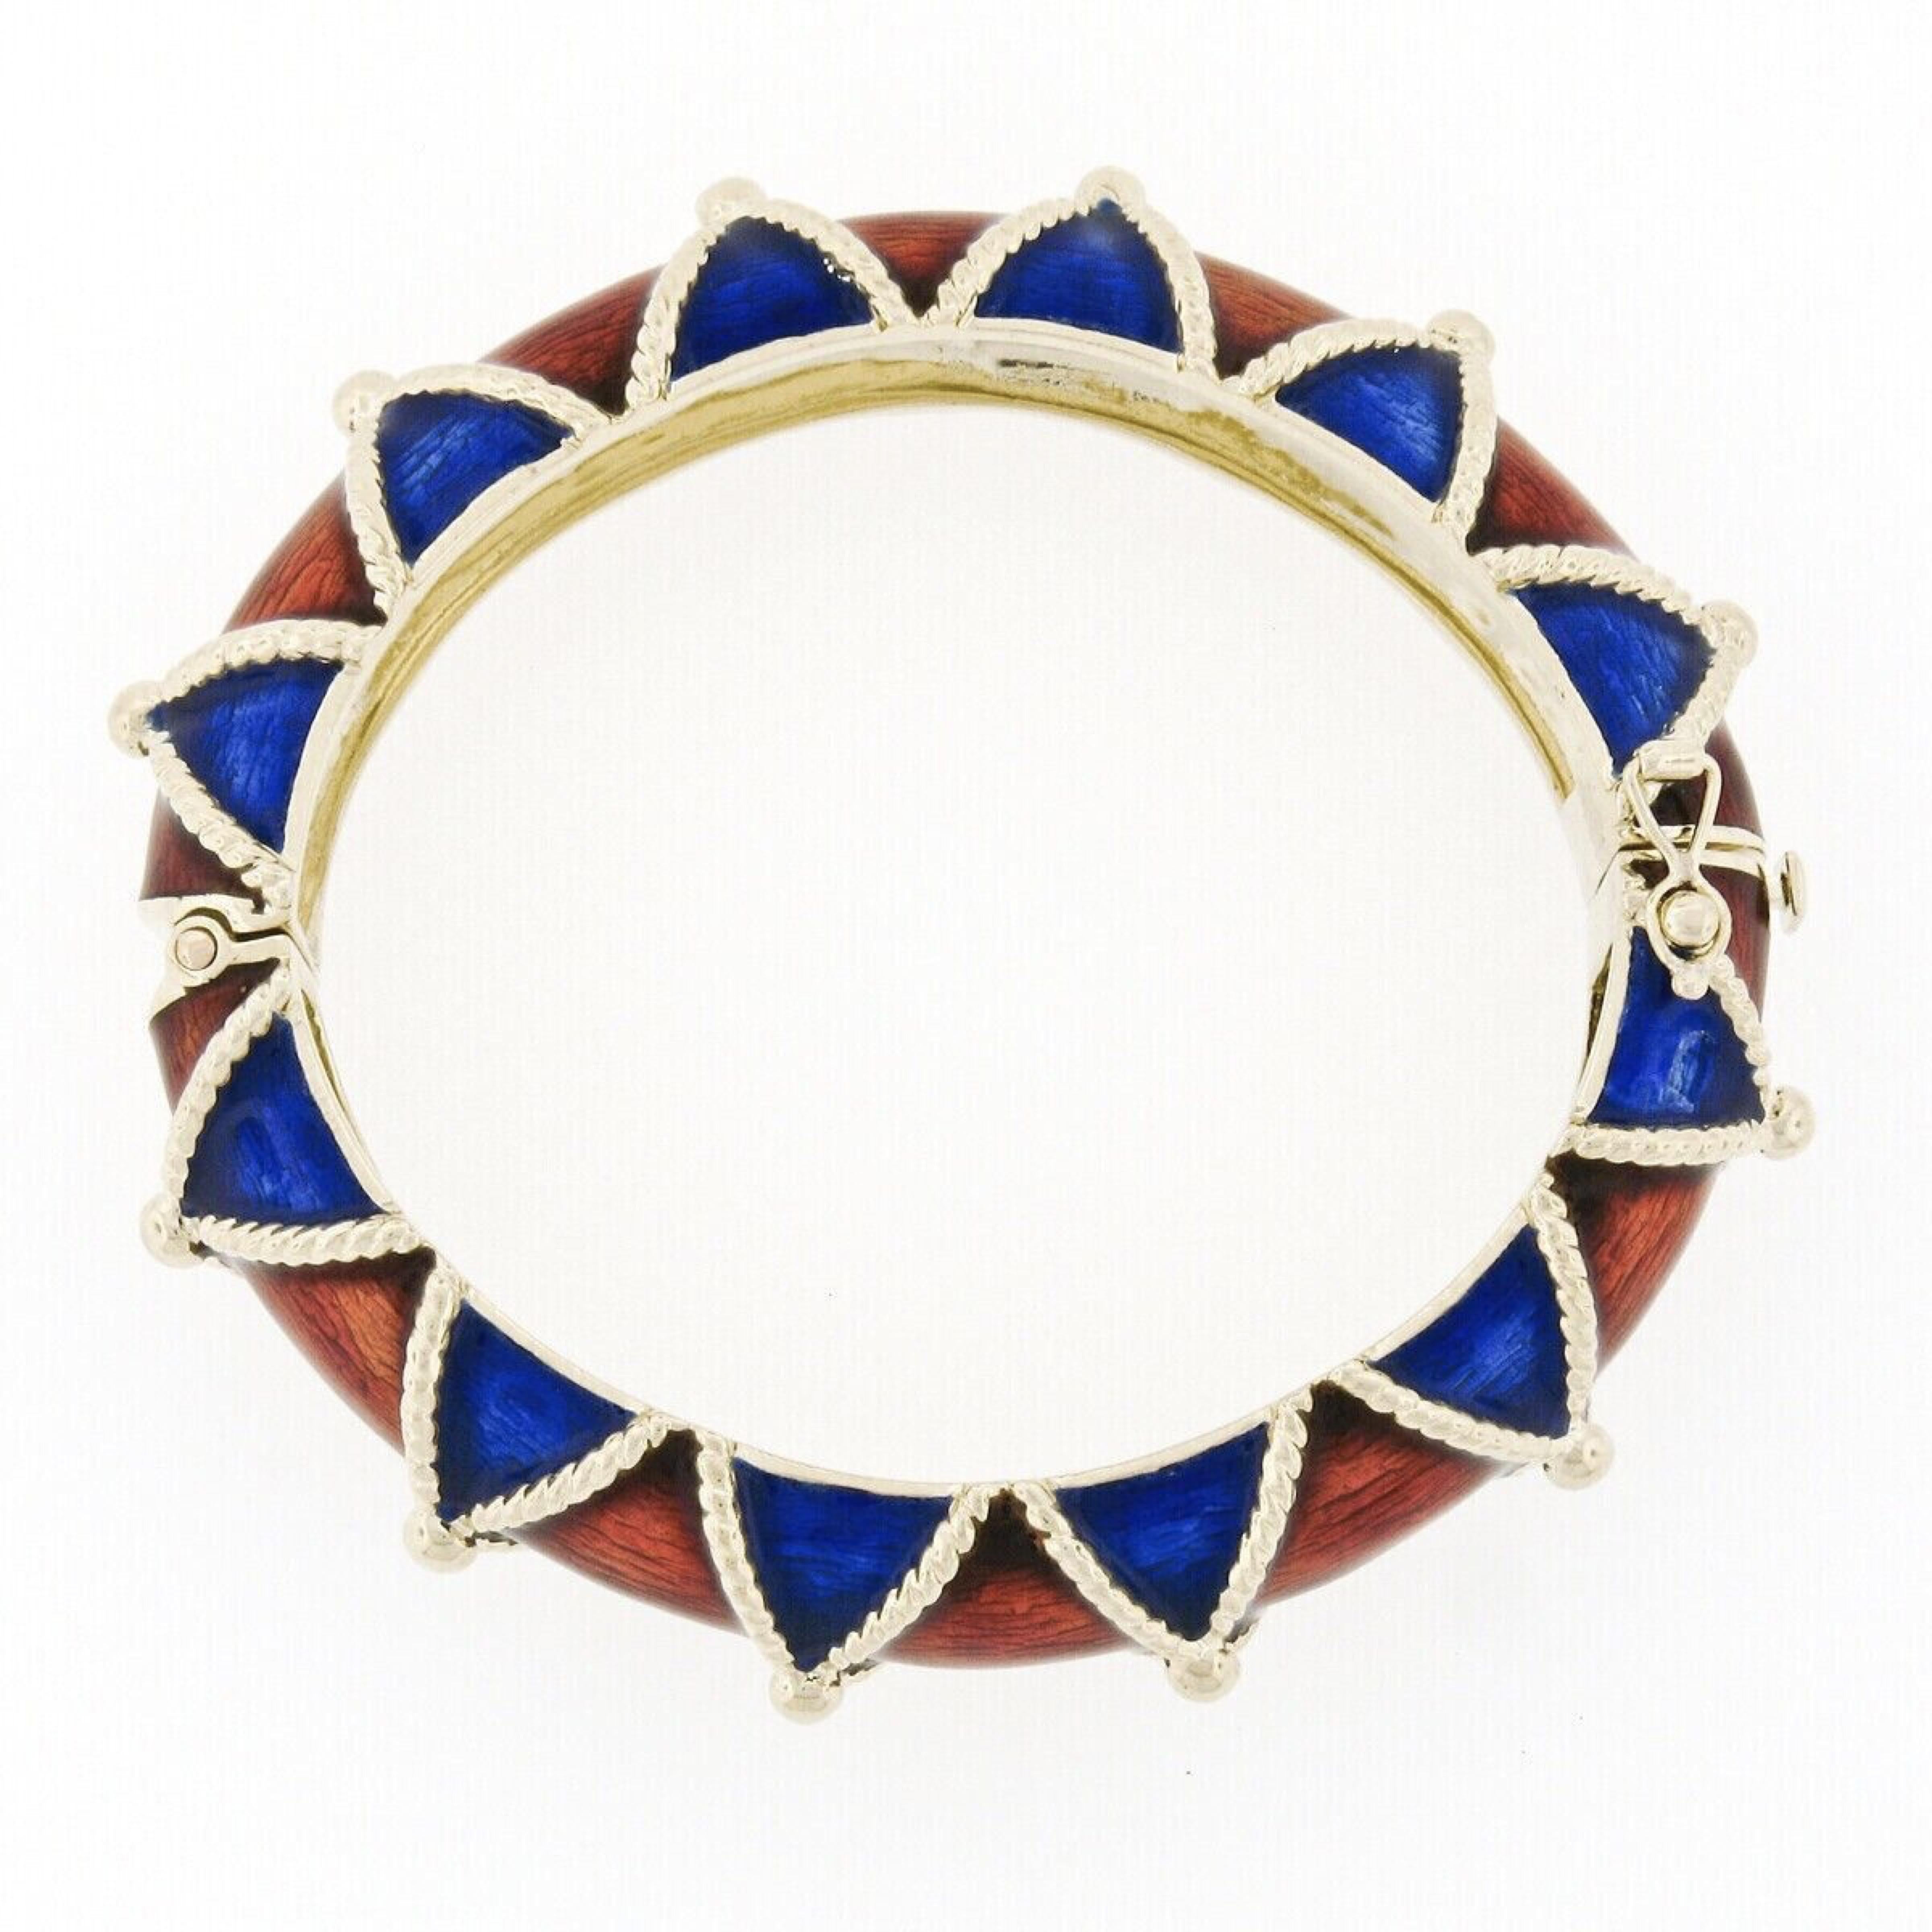 Large Heavy Vintage 14K Gold Blue Red Enamel Twisted Wire Hinged Bangle Bracelet In Good Condition For Sale In Montclair, NJ